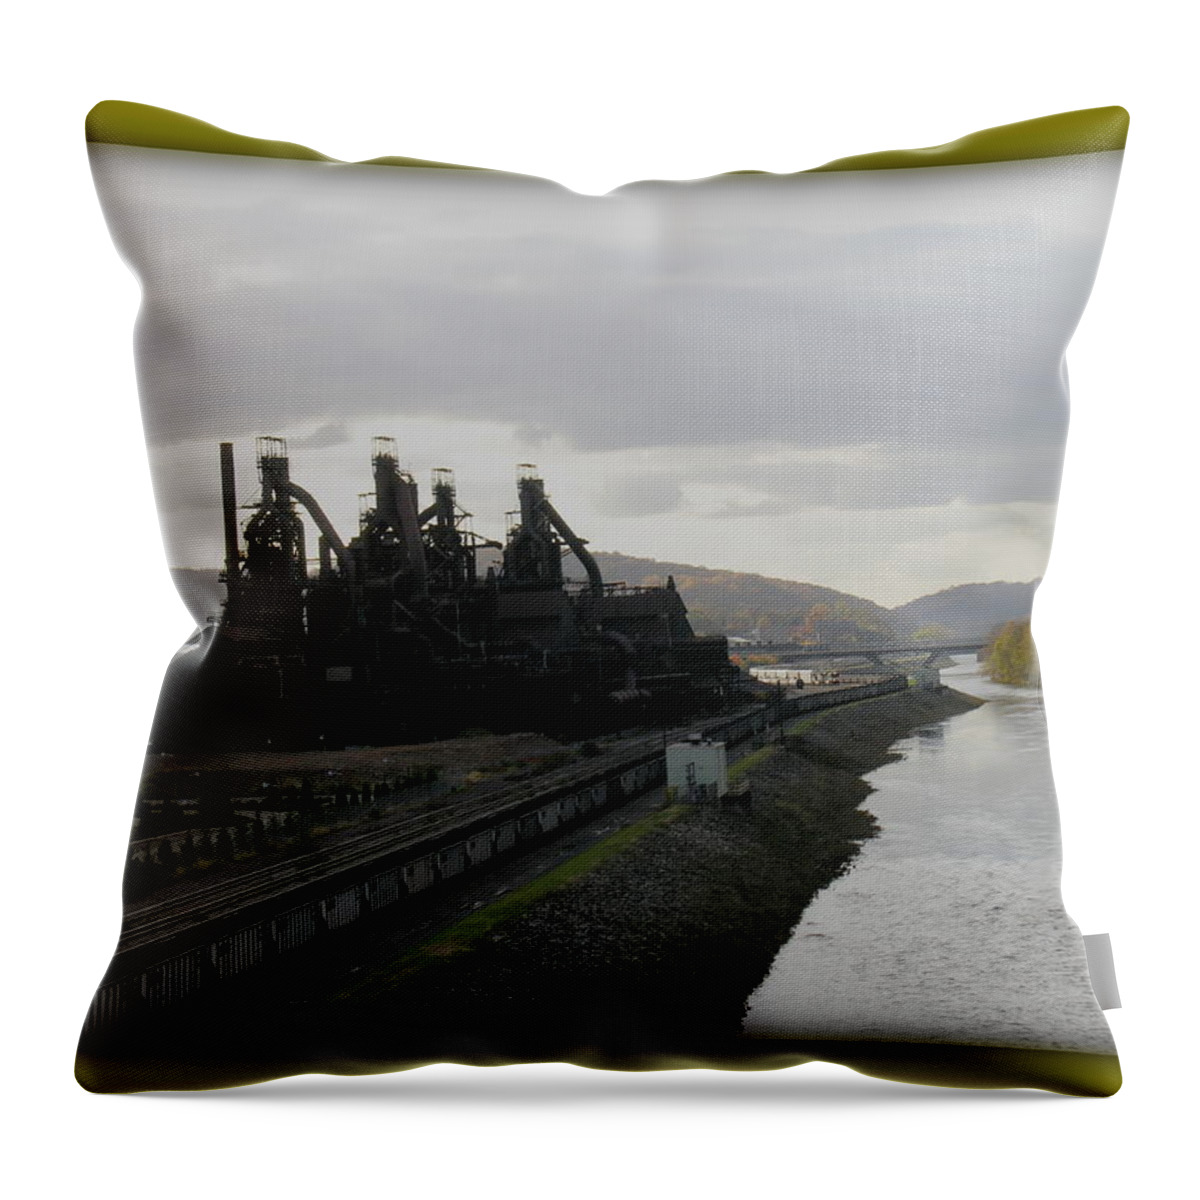 Bethlehem Steel Throw Pillow featuring the photograph Bethlehem Steel by Jacqueline M Lewis